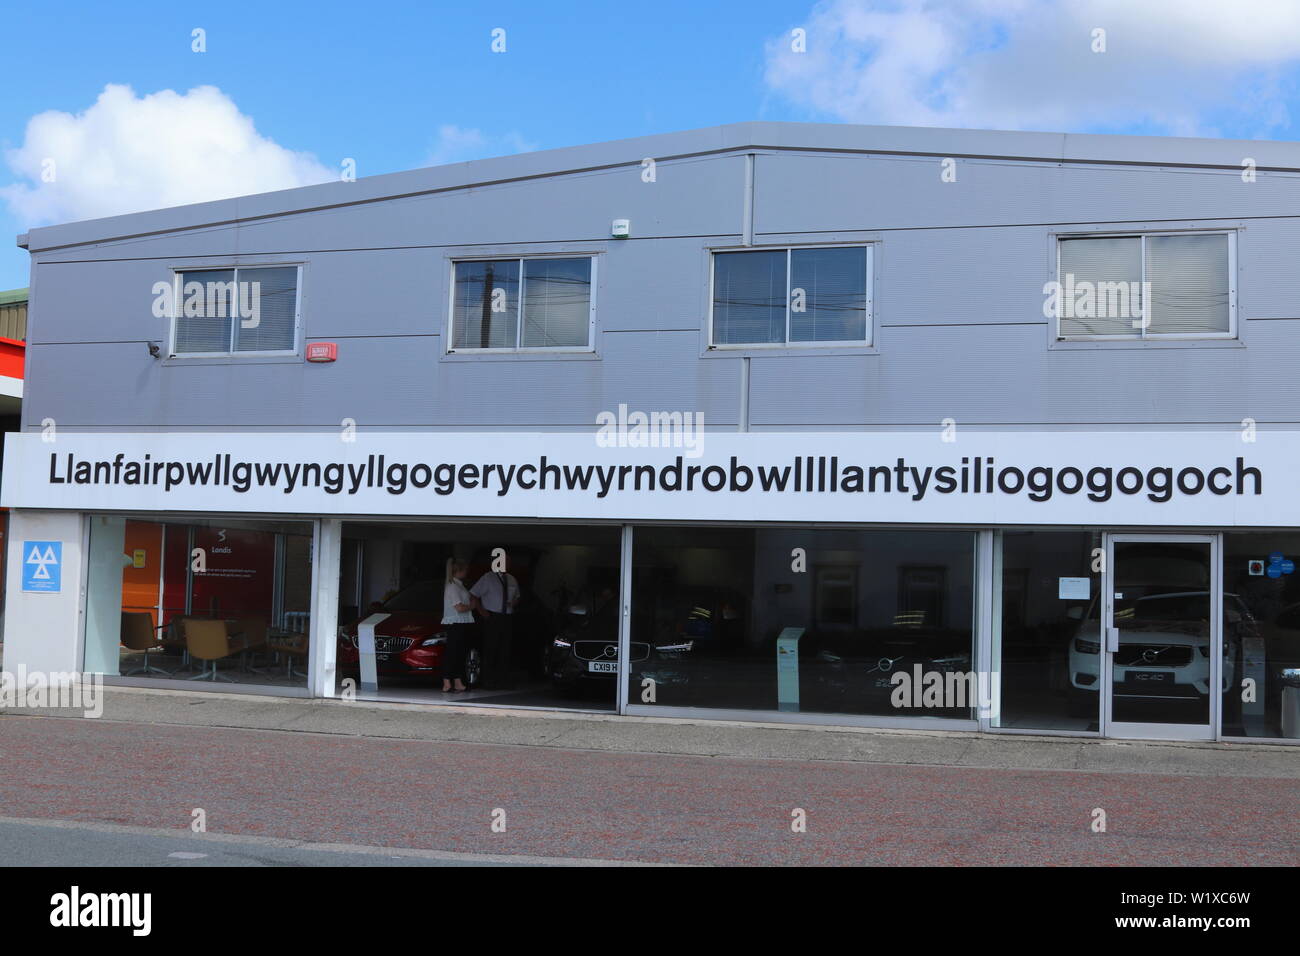 Llanfairpwllgwyngyllgogerychwyrndrobwllllantysiliogogog is a welsh village on Anglesey with the longest name in Britain with 58 characters Stock Photo